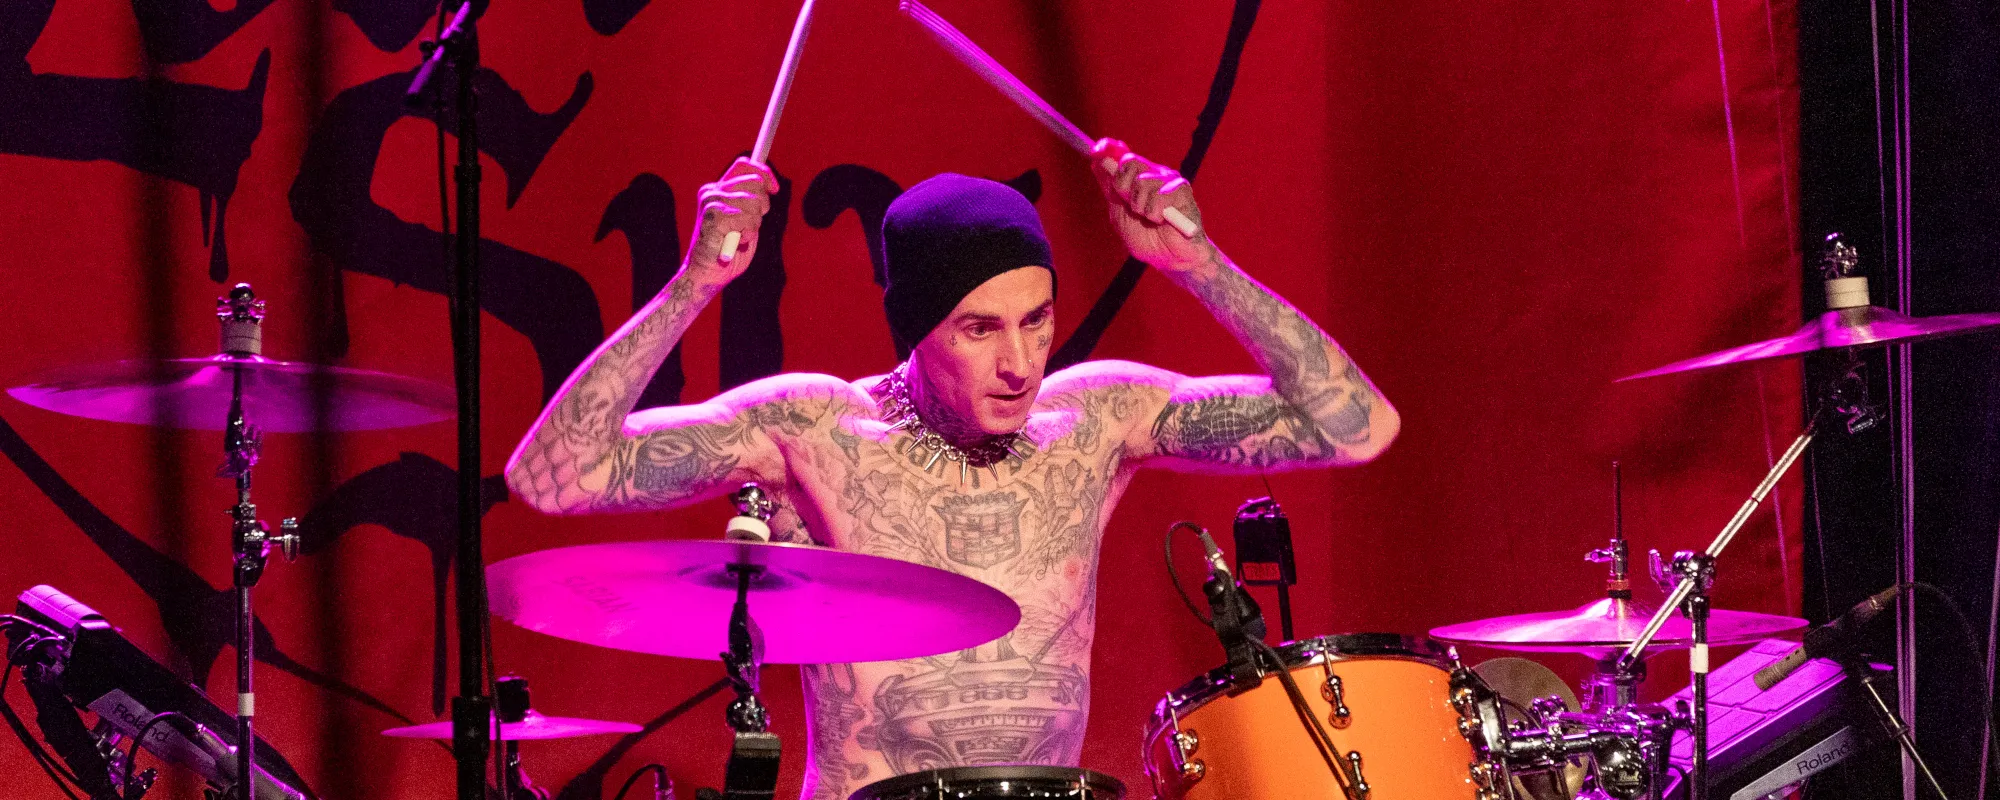 6 Songs You Didn’t Know Blink-182’s Travis Barker Wrote for Other Artists